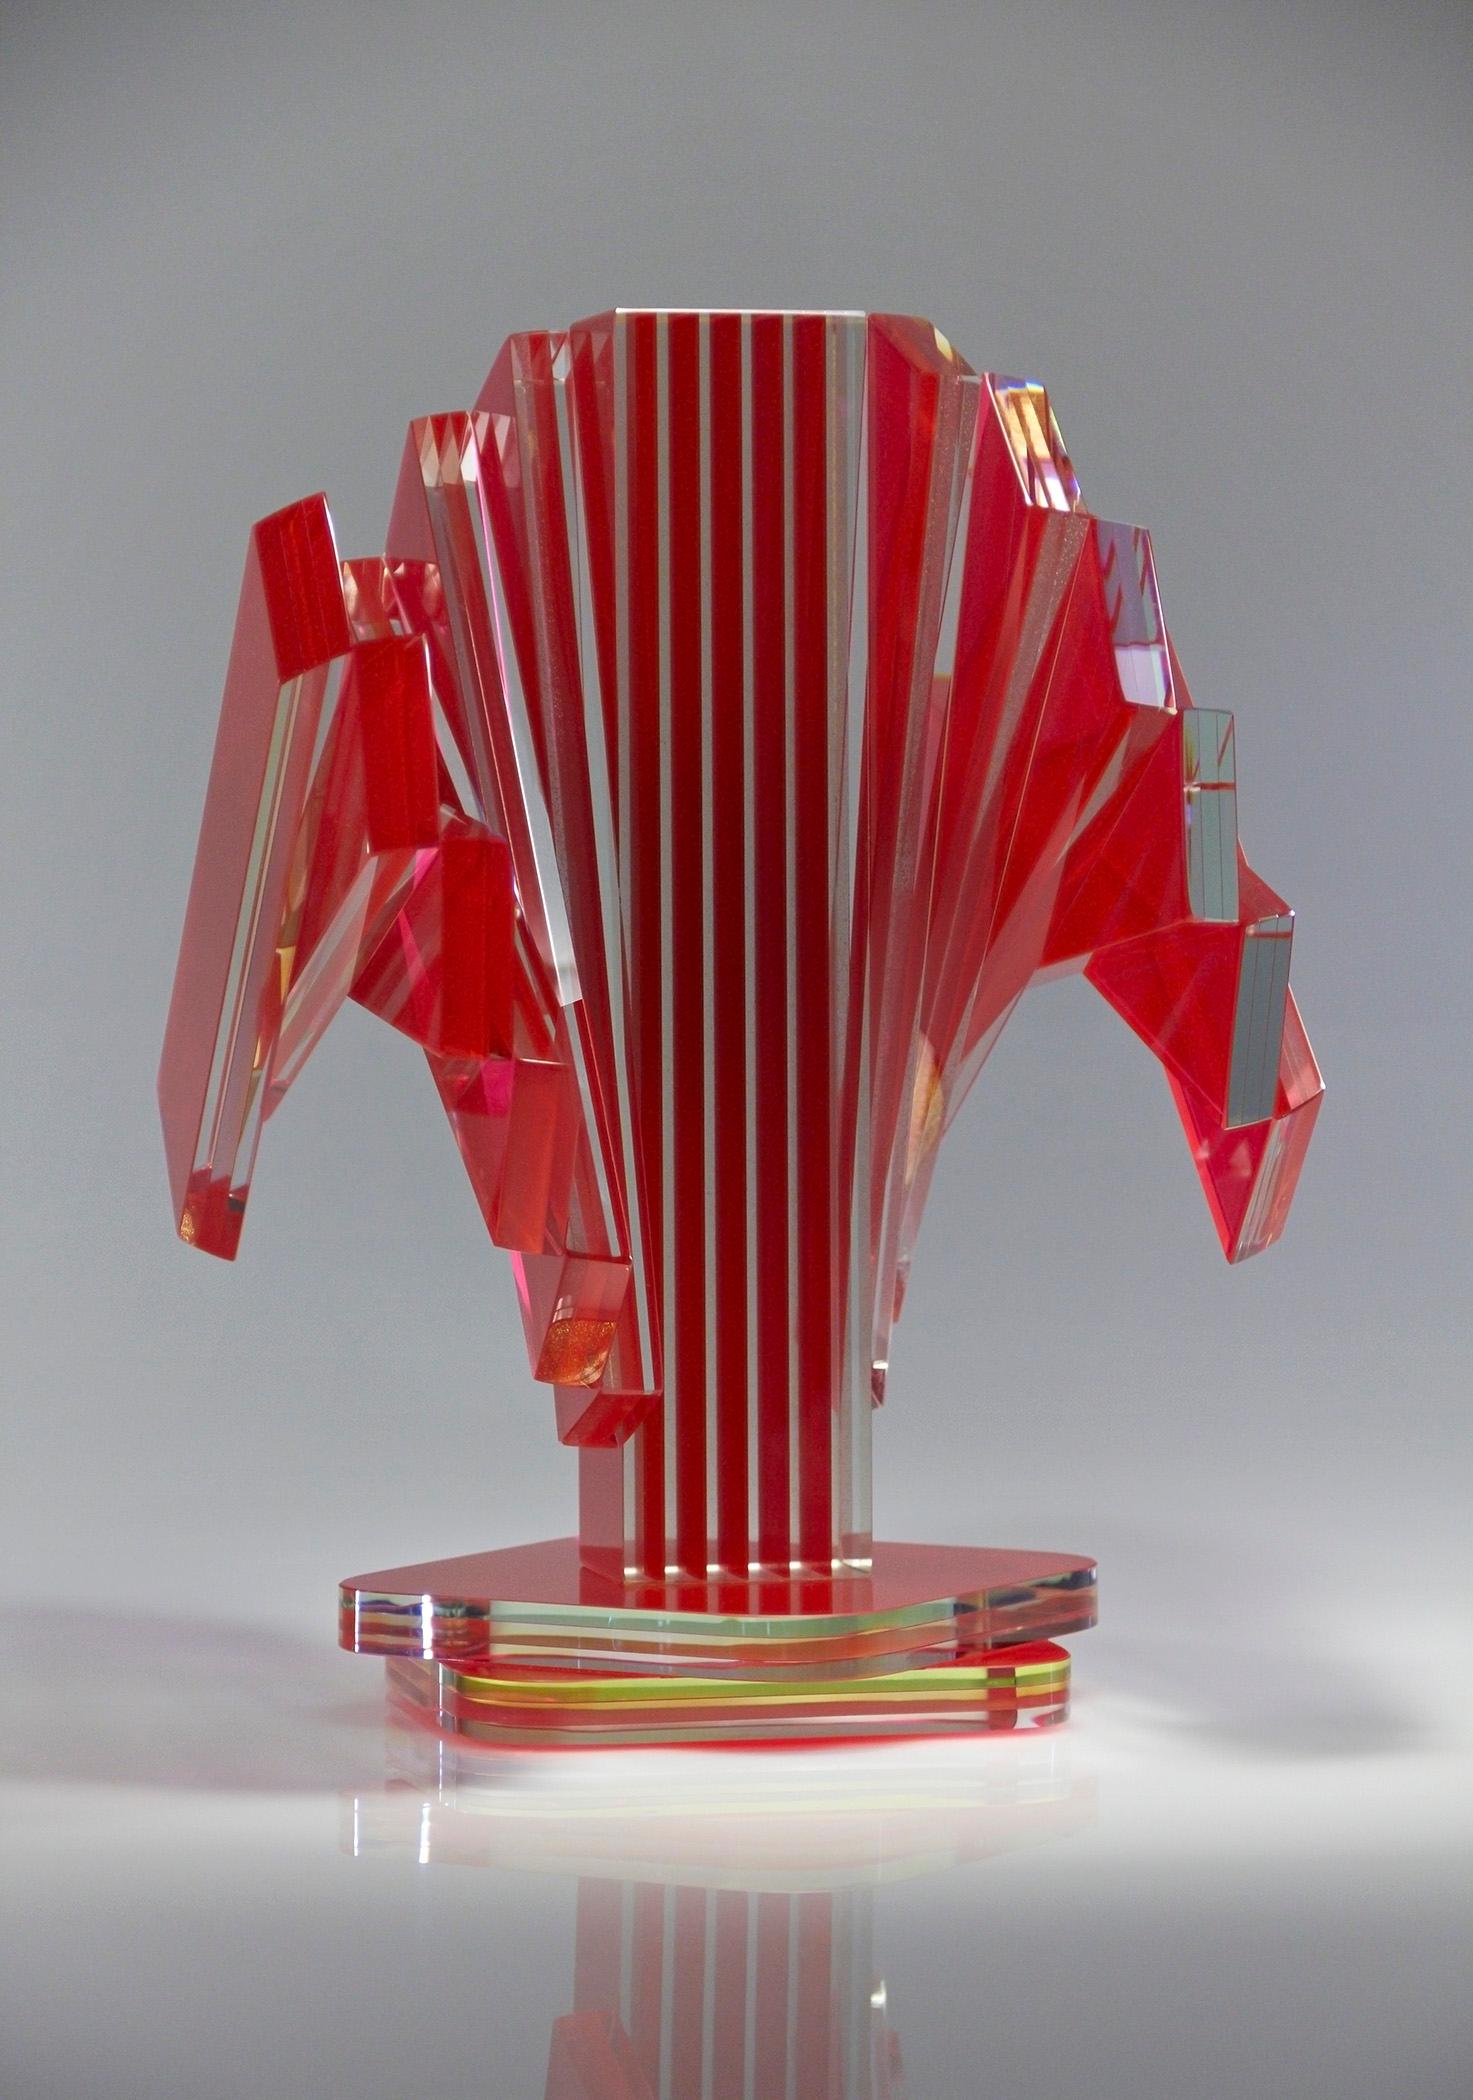 Red and Gold Plate Glass Contemporary Tabletop Sculpture (Handgefertigt) im Angebot